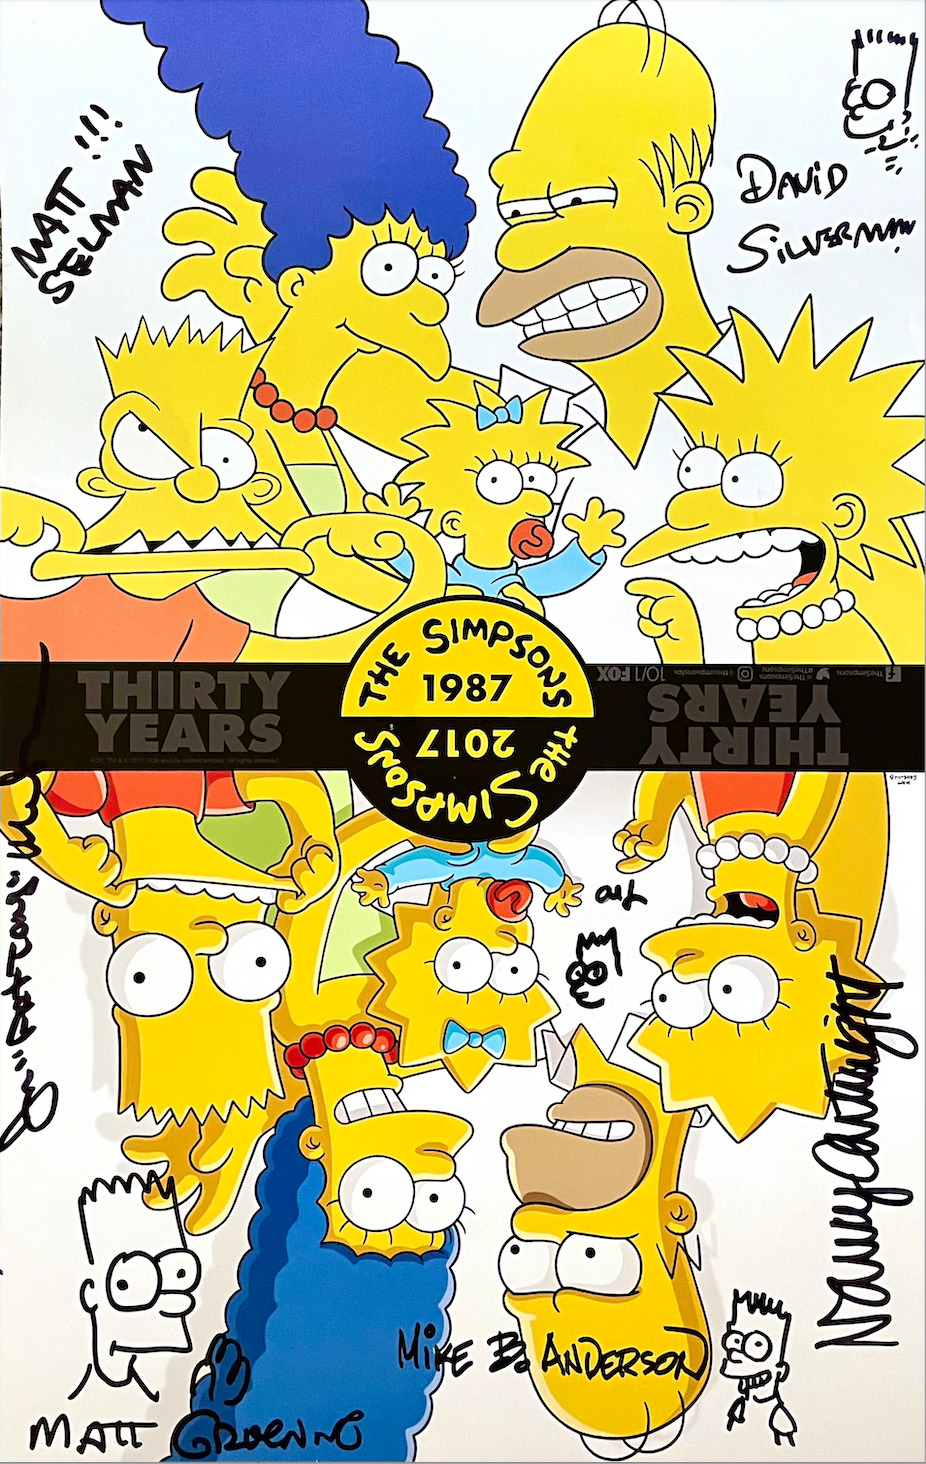 2017 Signed Simpsons\' Animated Family’s Landmark 30th Anniversary Poster